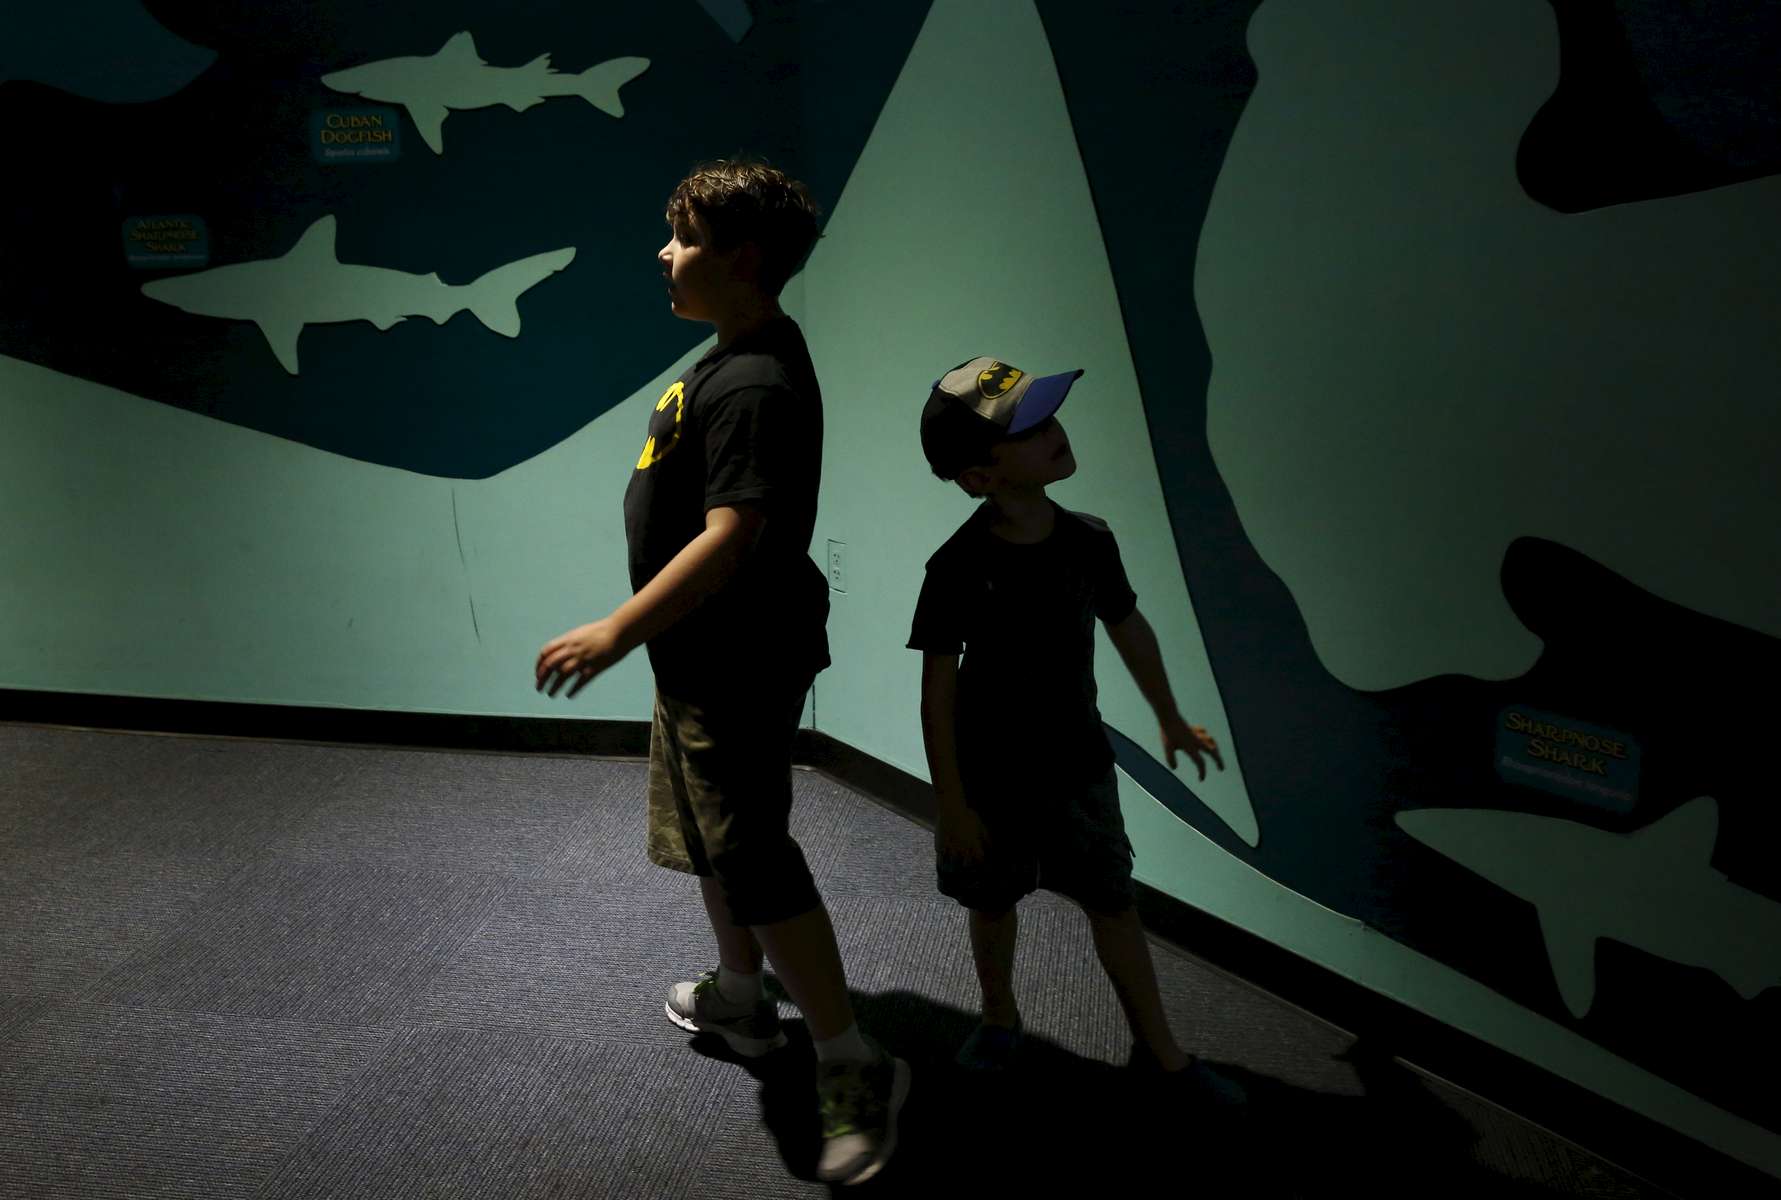 James Kaplan, 8, and his sibling Charley Kaplan, 4, wander through an aquarium during a family outing to Six Flags amusement park Aug. 20, 2016 in Vallejo, Calif.